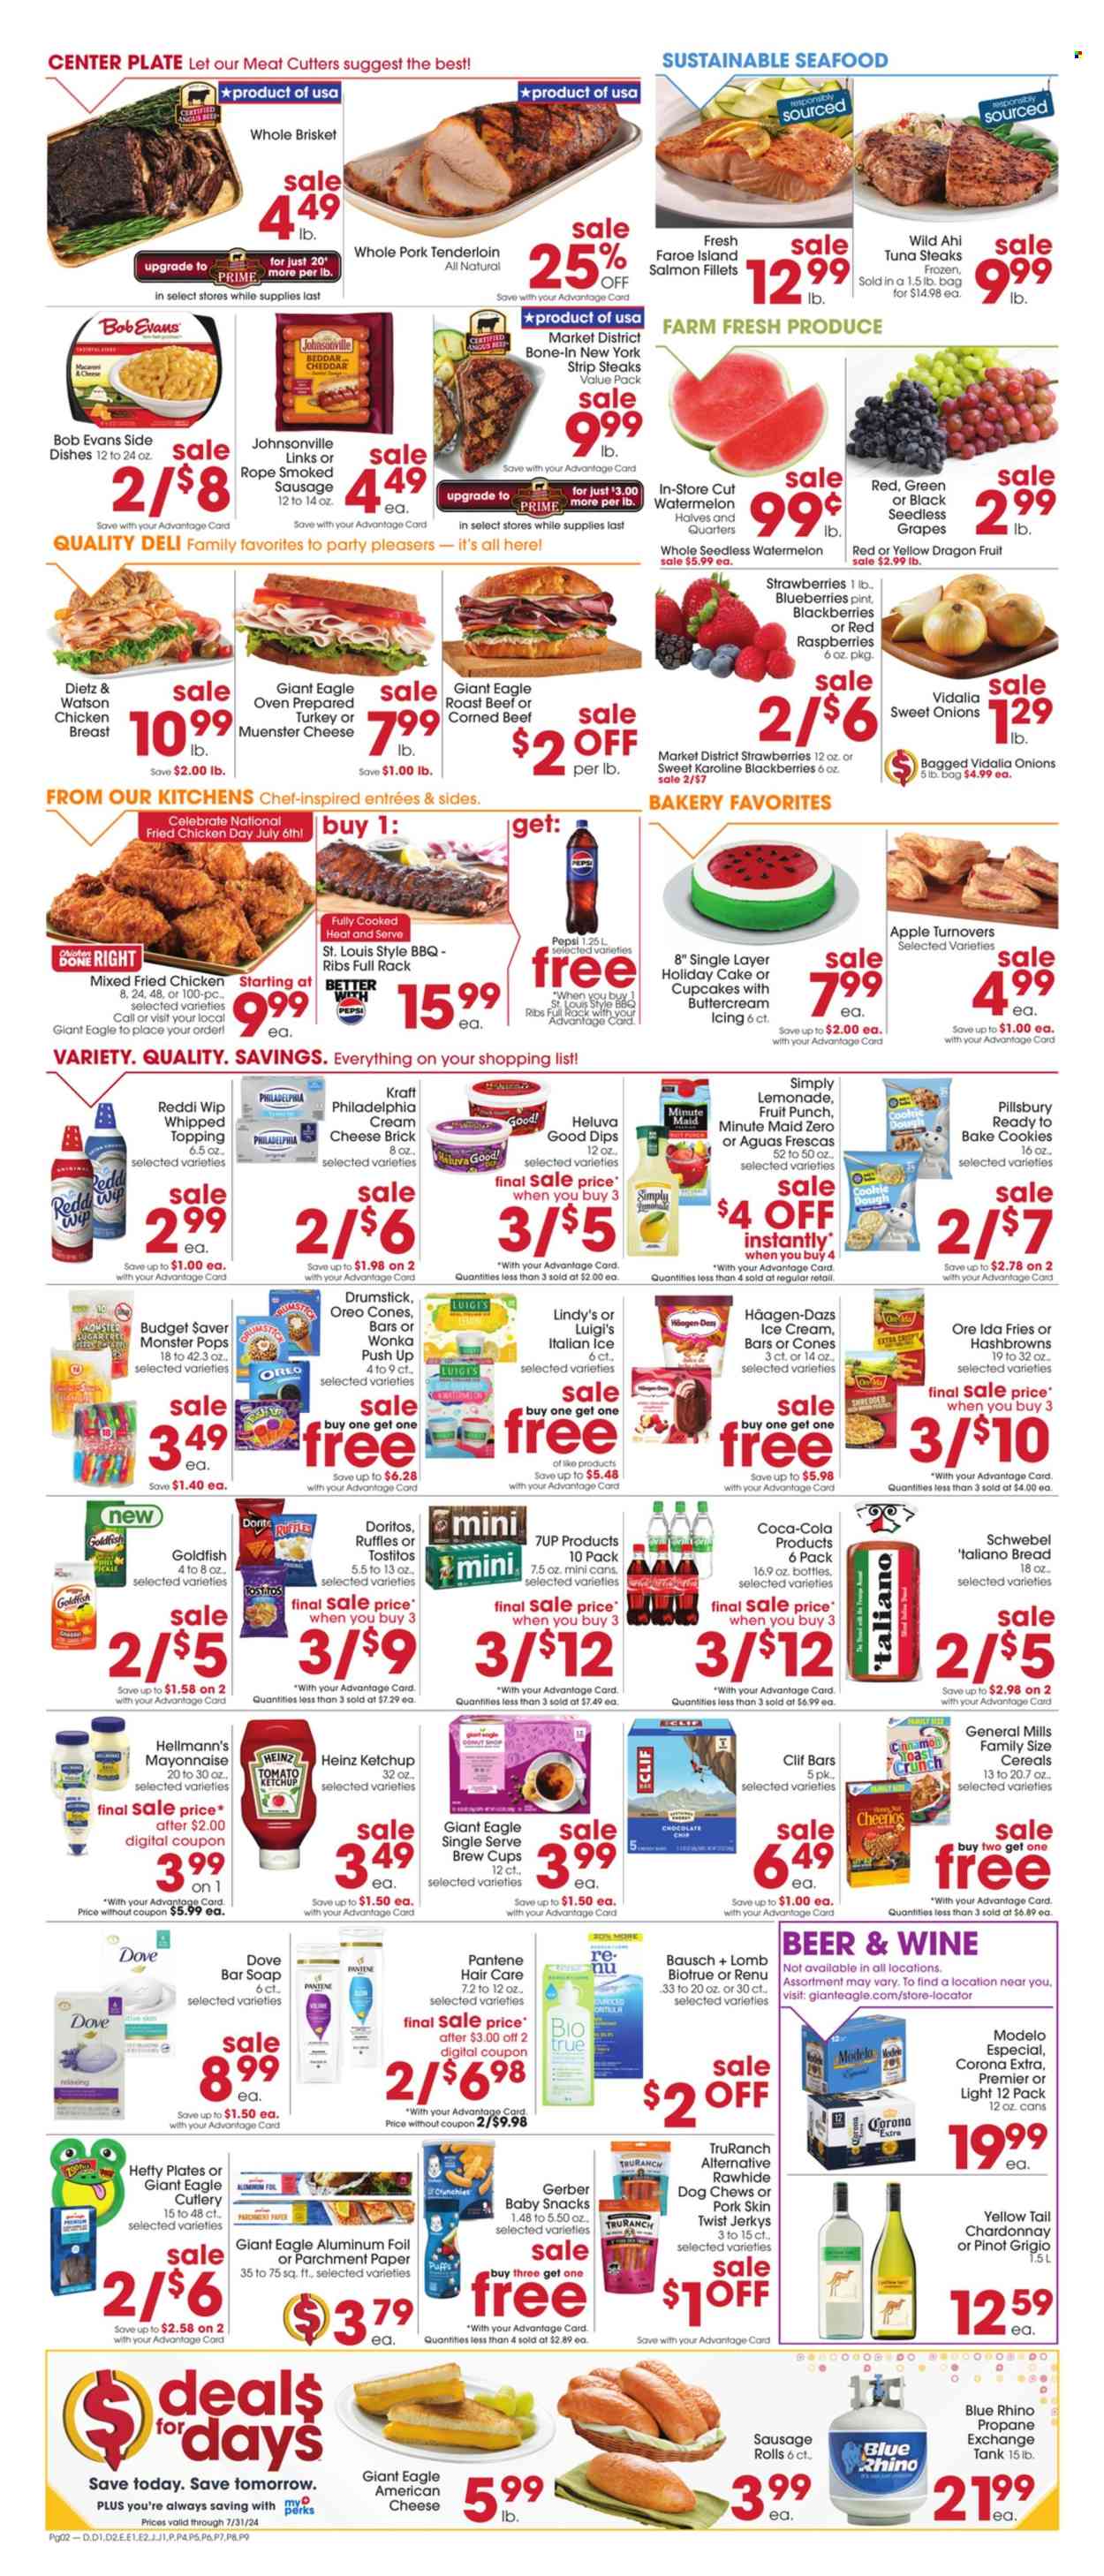 thumbnail - Giant Eagle Flyer - 07/04/2024 - 07/10/2024 - Sales products - sausage rolls, turnovers, cupcake, puffs, onion, grapes, seedless grapes, dragon fruit, fish fillets, salmon fillet, tuna, tuna steak, fish steak, snack, pasta, Pillsbury, Kraft®, Bob Evans, brisket, ready meal, ham, chicken breasts, roast beef, Johnsonville, Dietz & Watson, smoked sausage, corned beef, american cheese, cream cheese, Philadelphia, Münster cheese, Oreo, mayonnaise, dip, Hellmann’s, Dove, ice cream, Häagen-Dazs, hash browns, potato fries, Ore-Ida, General Mills, Doritos, Gerber, Goldfish, Ruffles, Tostitos, salty snack, frosting, topping, dill pickle, Heinz, Cheerios, energy bar, ketchup, Coca-Cola, lemonade, Pepsi, Monster, fruit drink, soft drink, 7UP, fruit punch, carbonated soft drink, white wine, Chardonnay, wine, alcohol, Pinot Grigio, beer, Corona Extra, Modelo, baby snack, beef steak, steak, striploin steak, pork meat, pork tenderloin, marinated pork, soap bar, soap, hair products, Pantene, Hefty, baking paper, aluminium foil, tank, animal treats, dog food, dog chews, Biotrue. Page 2.